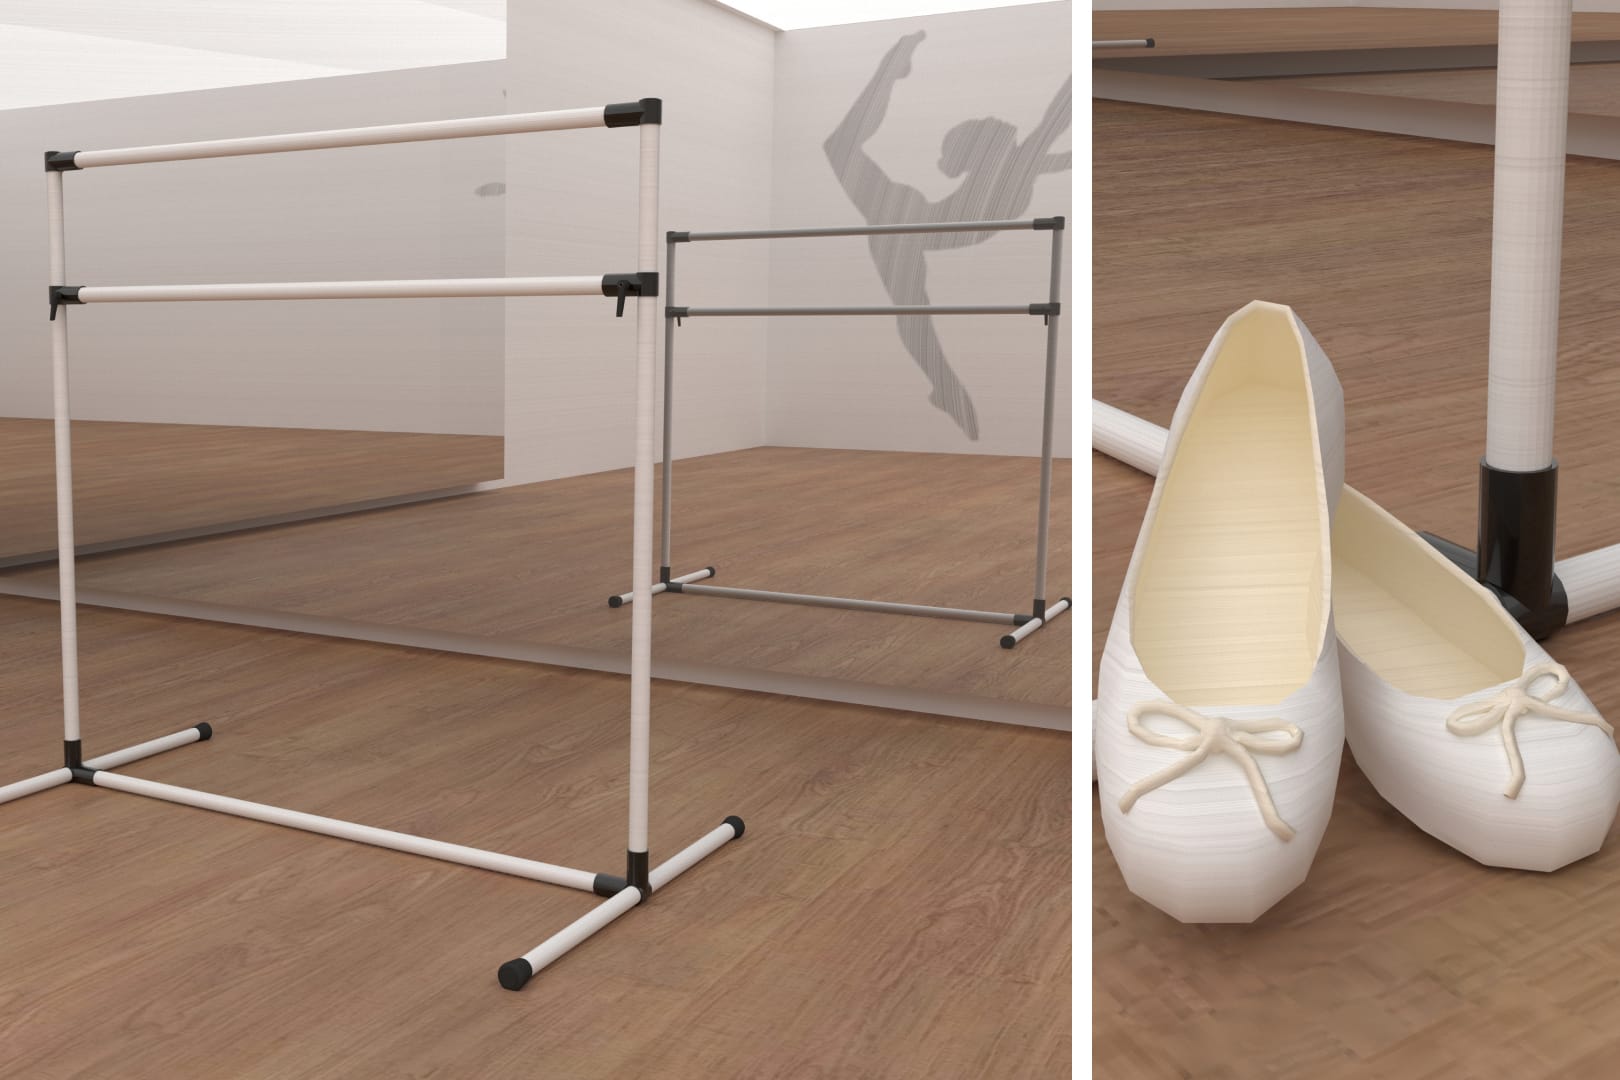 DIY ballet barre: Here's how to build your own - tinktube